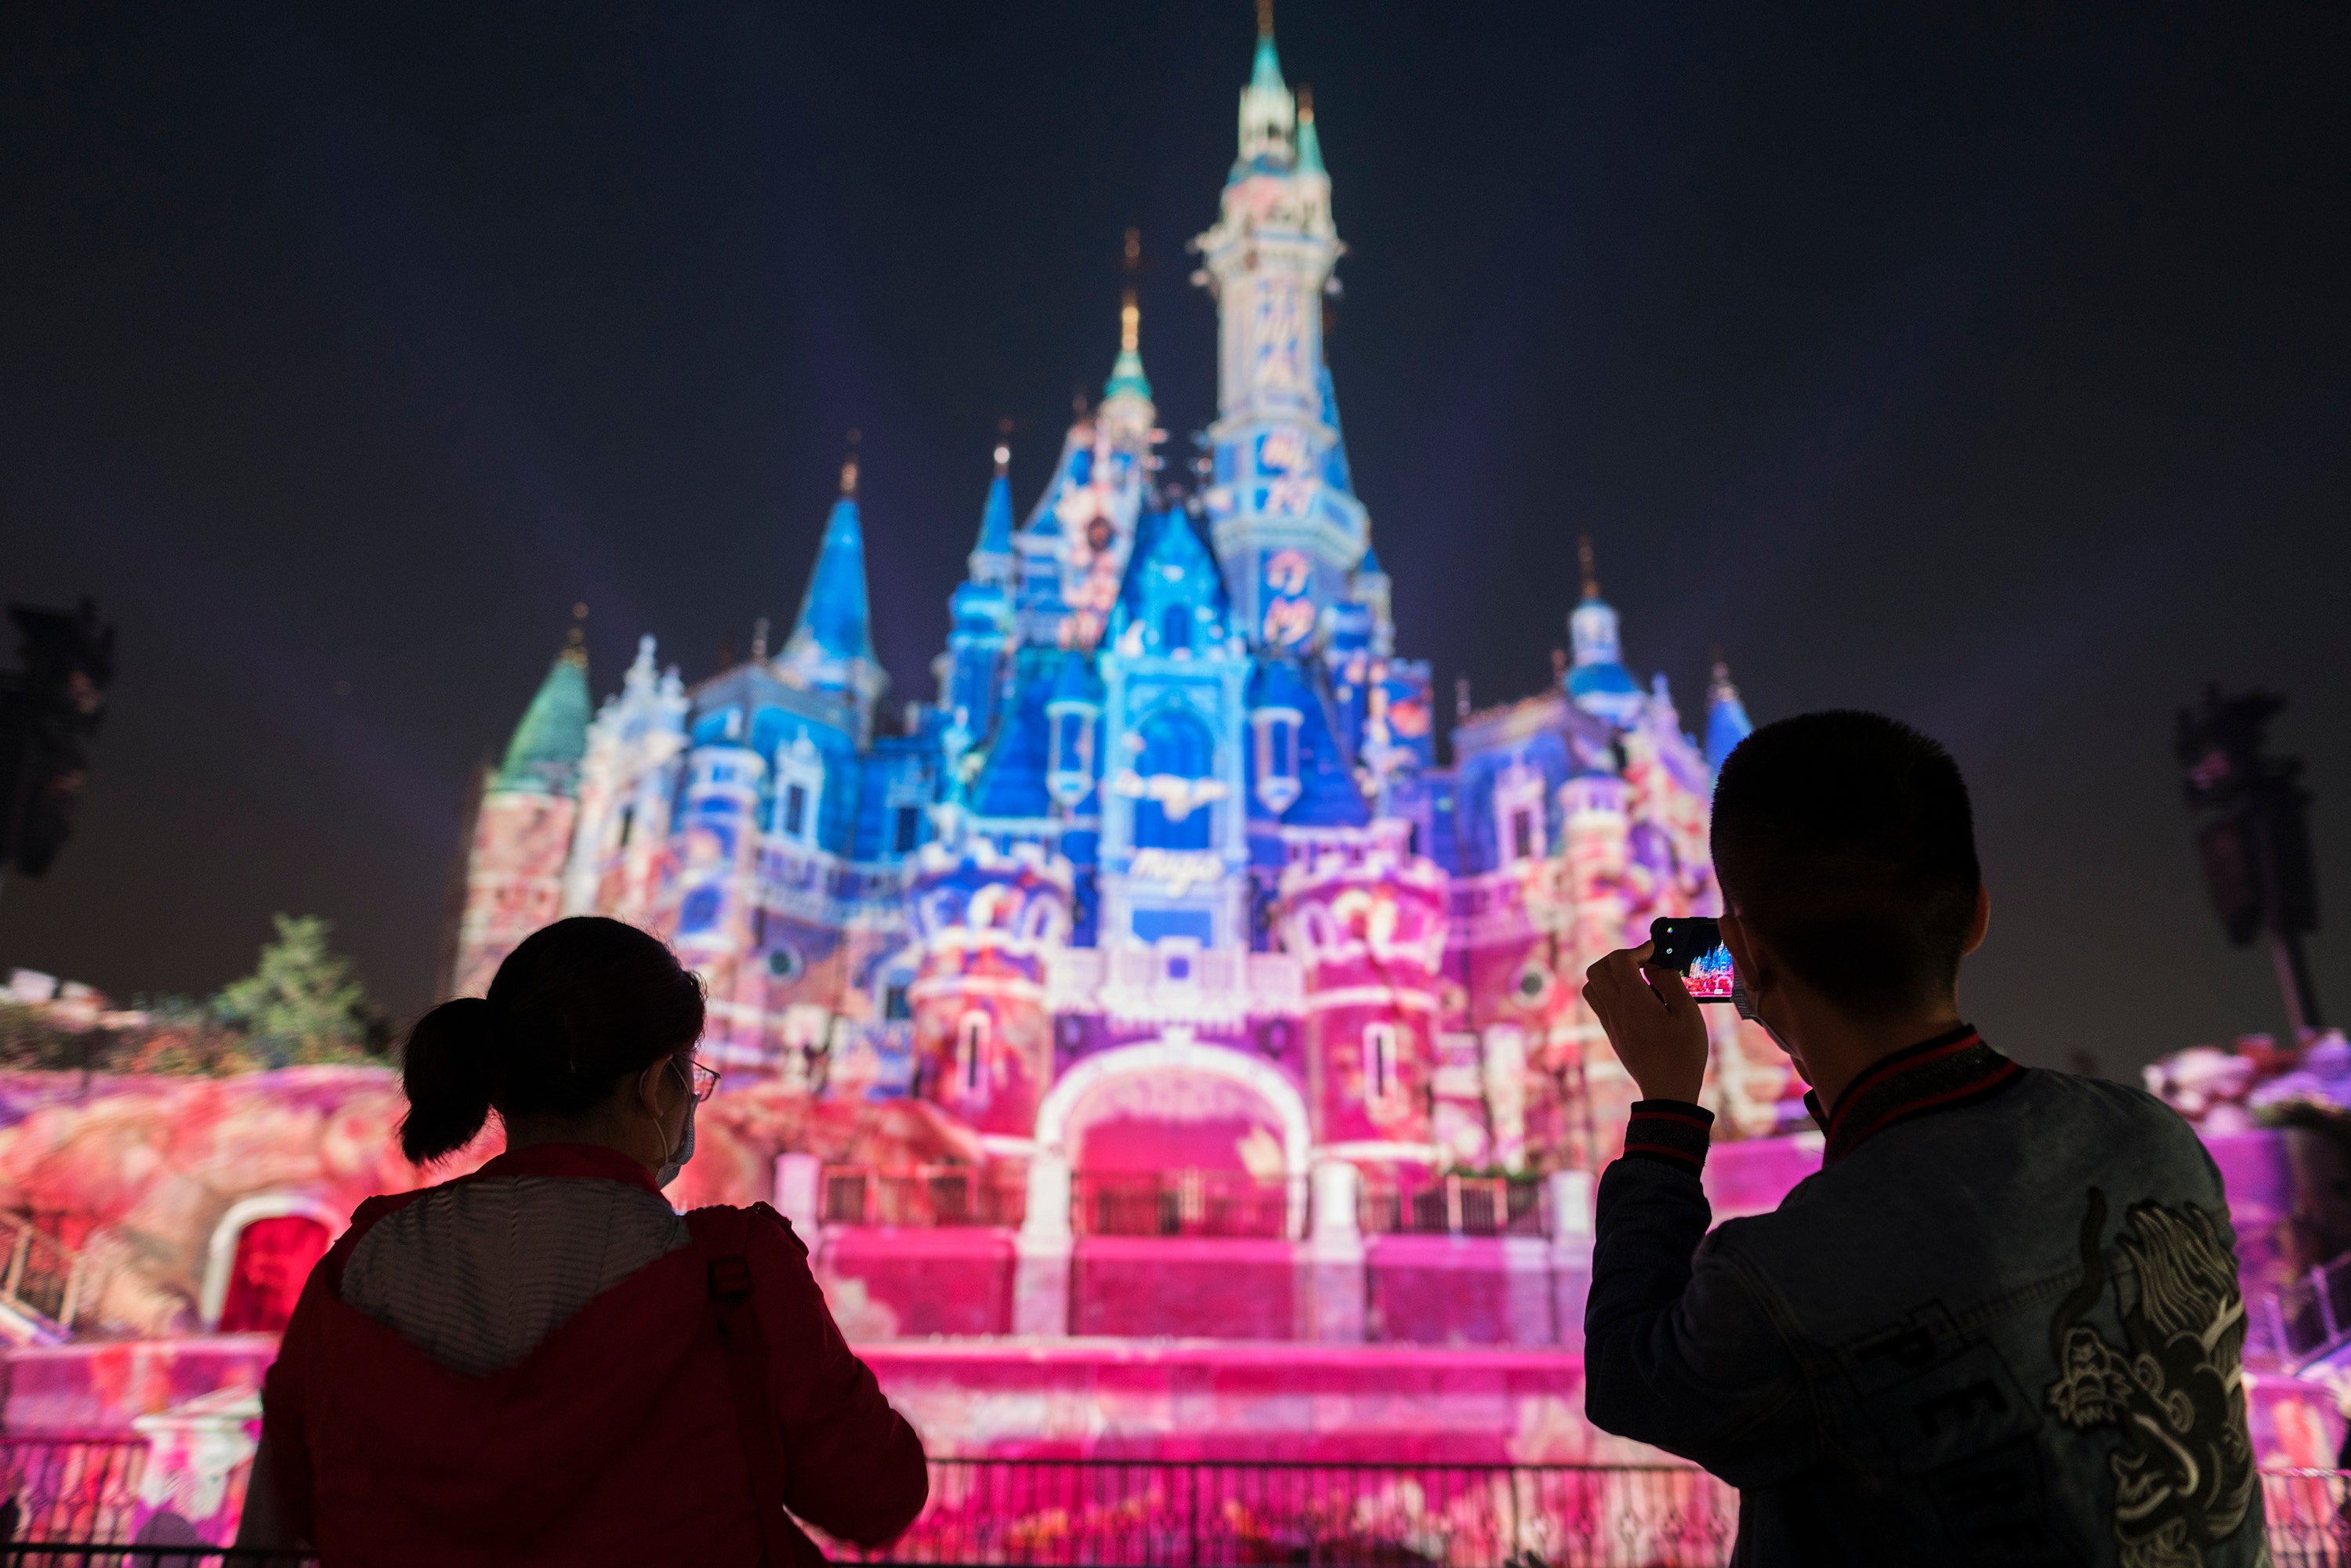 Disney plans to improve attractions and increase efficiency once theme parks are reopened, says the CEO